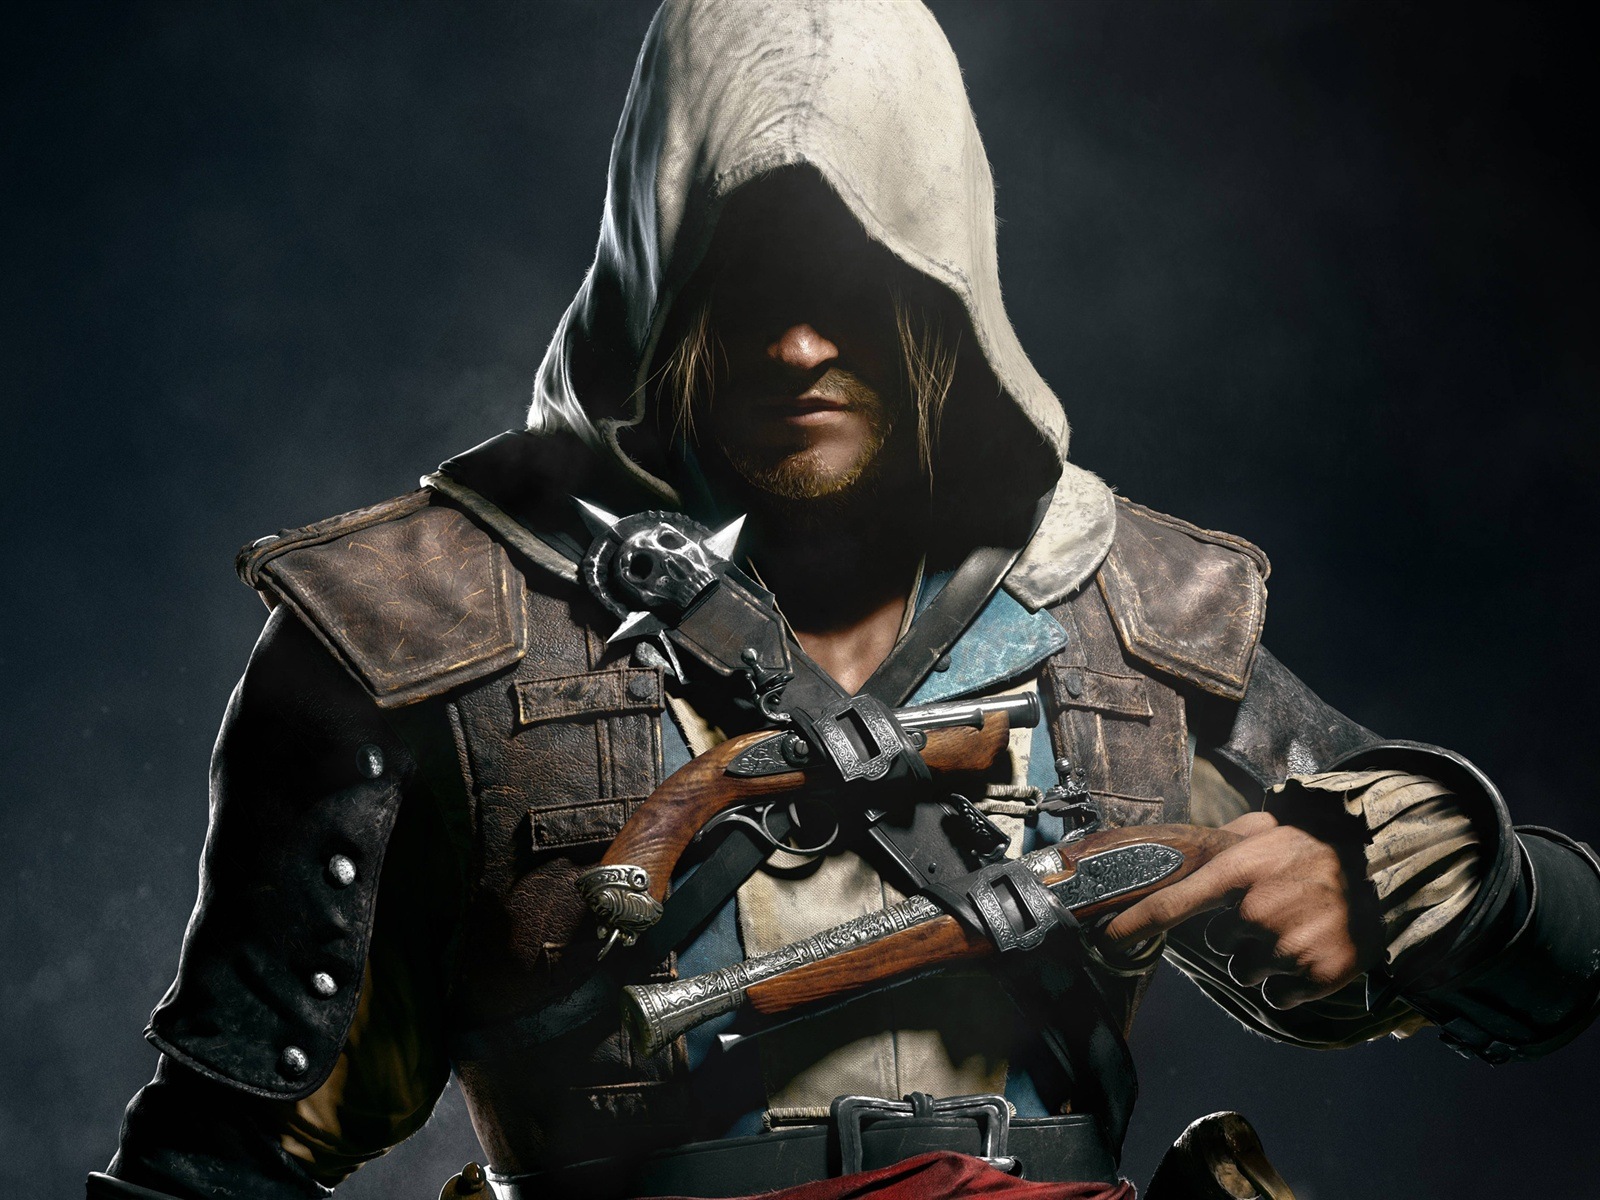 Creed IV Assassin: Black Flag HD wallpapers #13 - 1600x1200